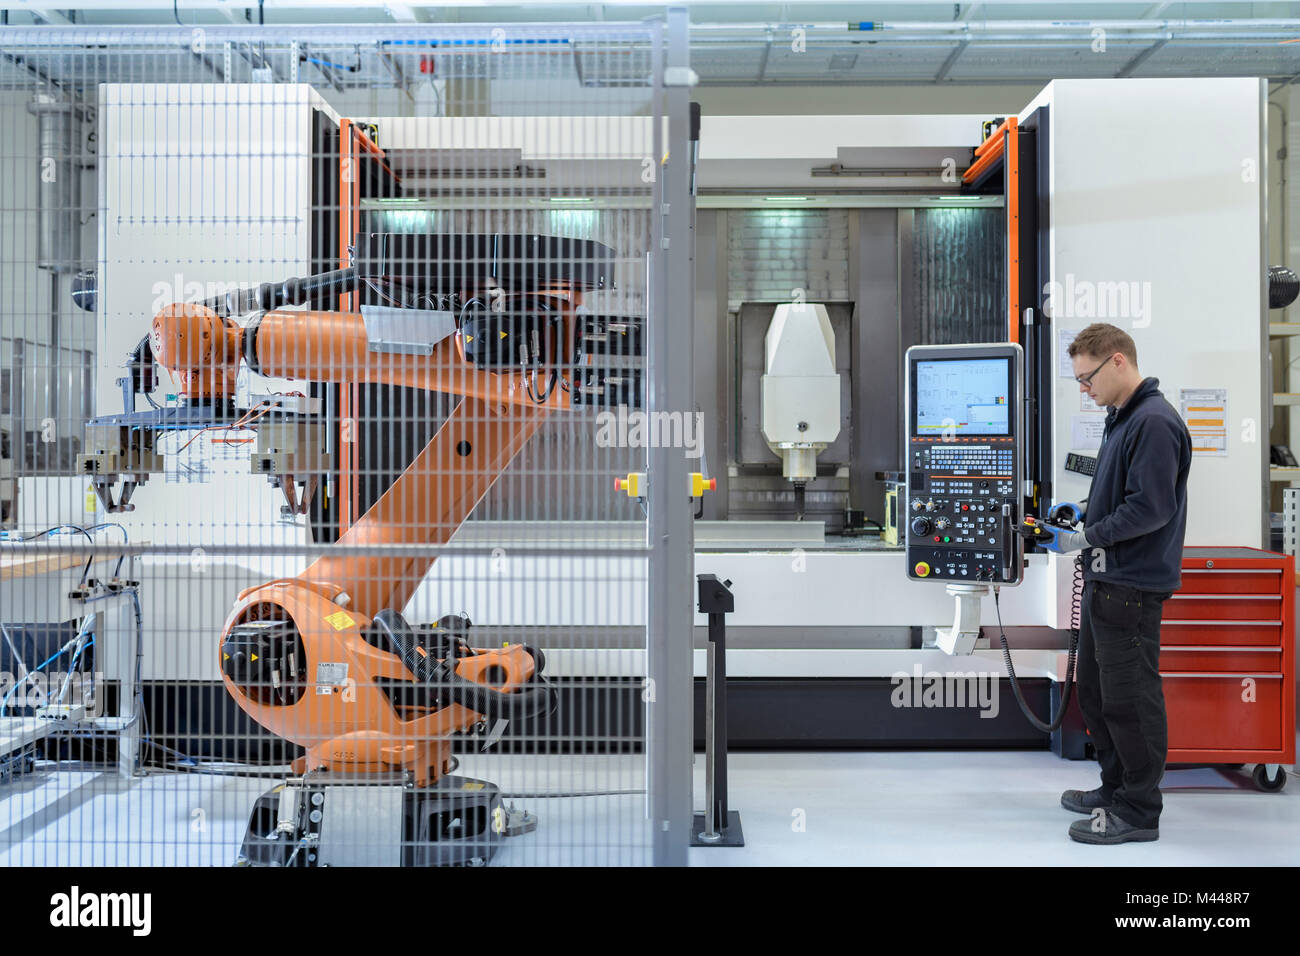 Robotics engineer operating robot aided CNC machine in robotics research facility Stock Photo